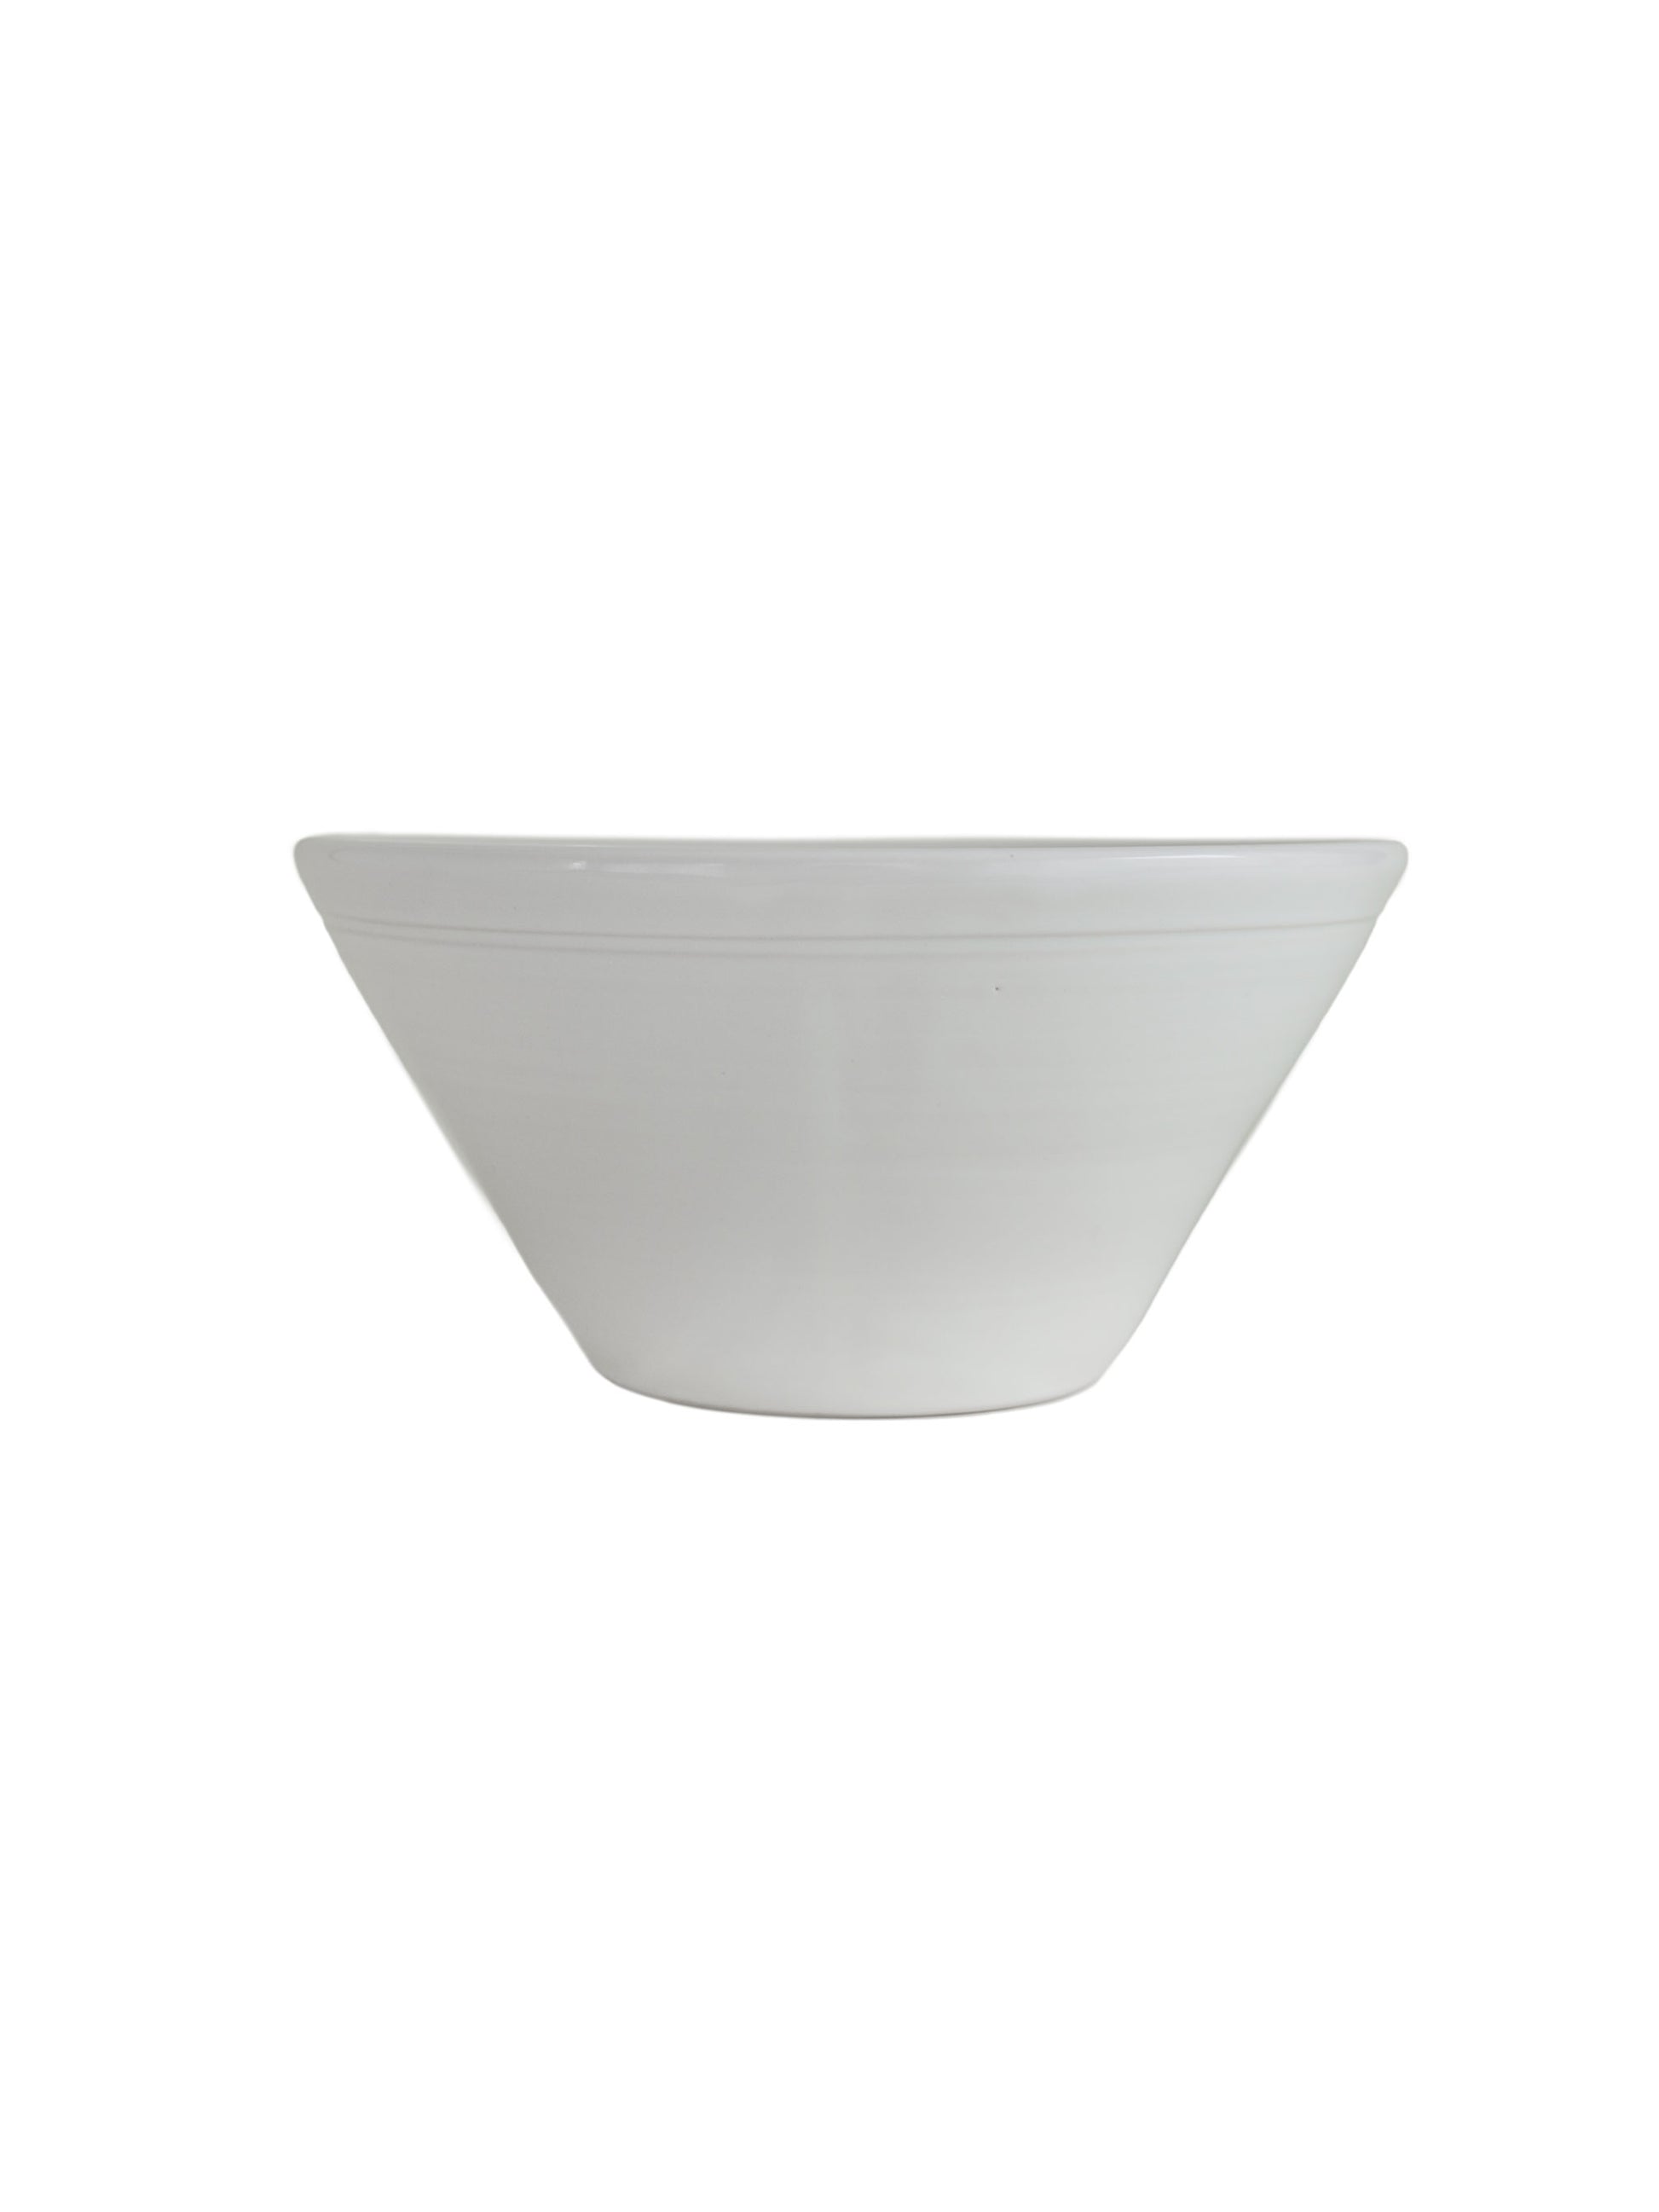 McQueen Pottery Serving Bowl White Weston Table